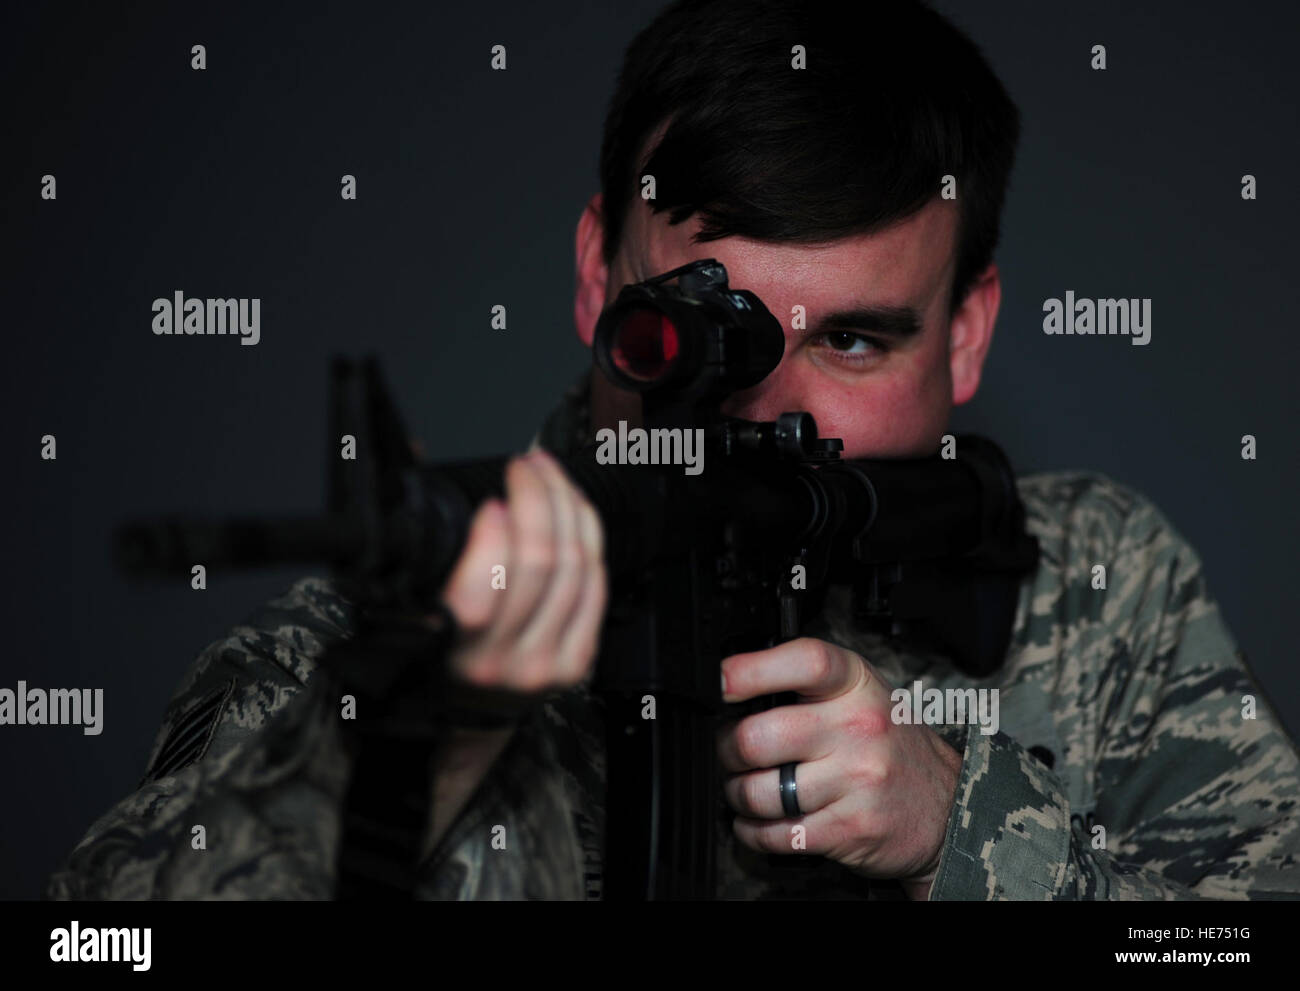 U.S. Air Force Staff Sgt. Ryan Gulley, 633rd Security Forces Squadron training instructor, fires at a simulated target at Langley Air Force Base, Va., Jan. 26, 2015. The new firearms simulator allows Airmen to gain real-world knowledge and experience through projections of real-life scenarios.  Airman 1st Class Areca T. Wilson Stock Photo